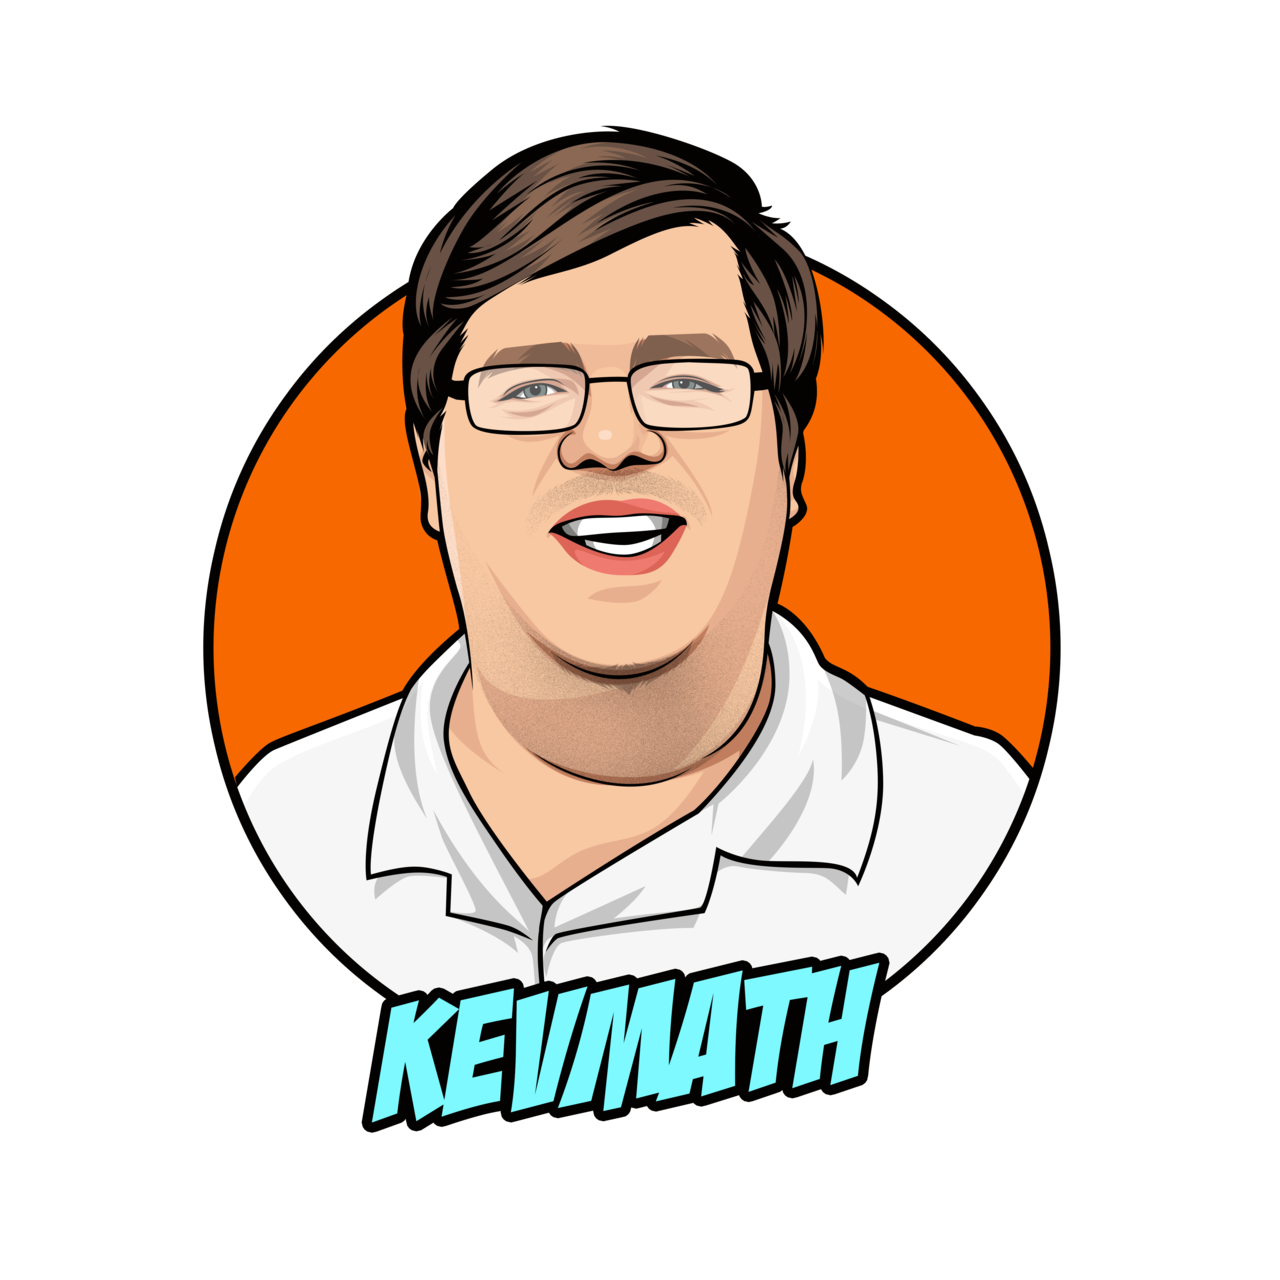 The Kevmath Report